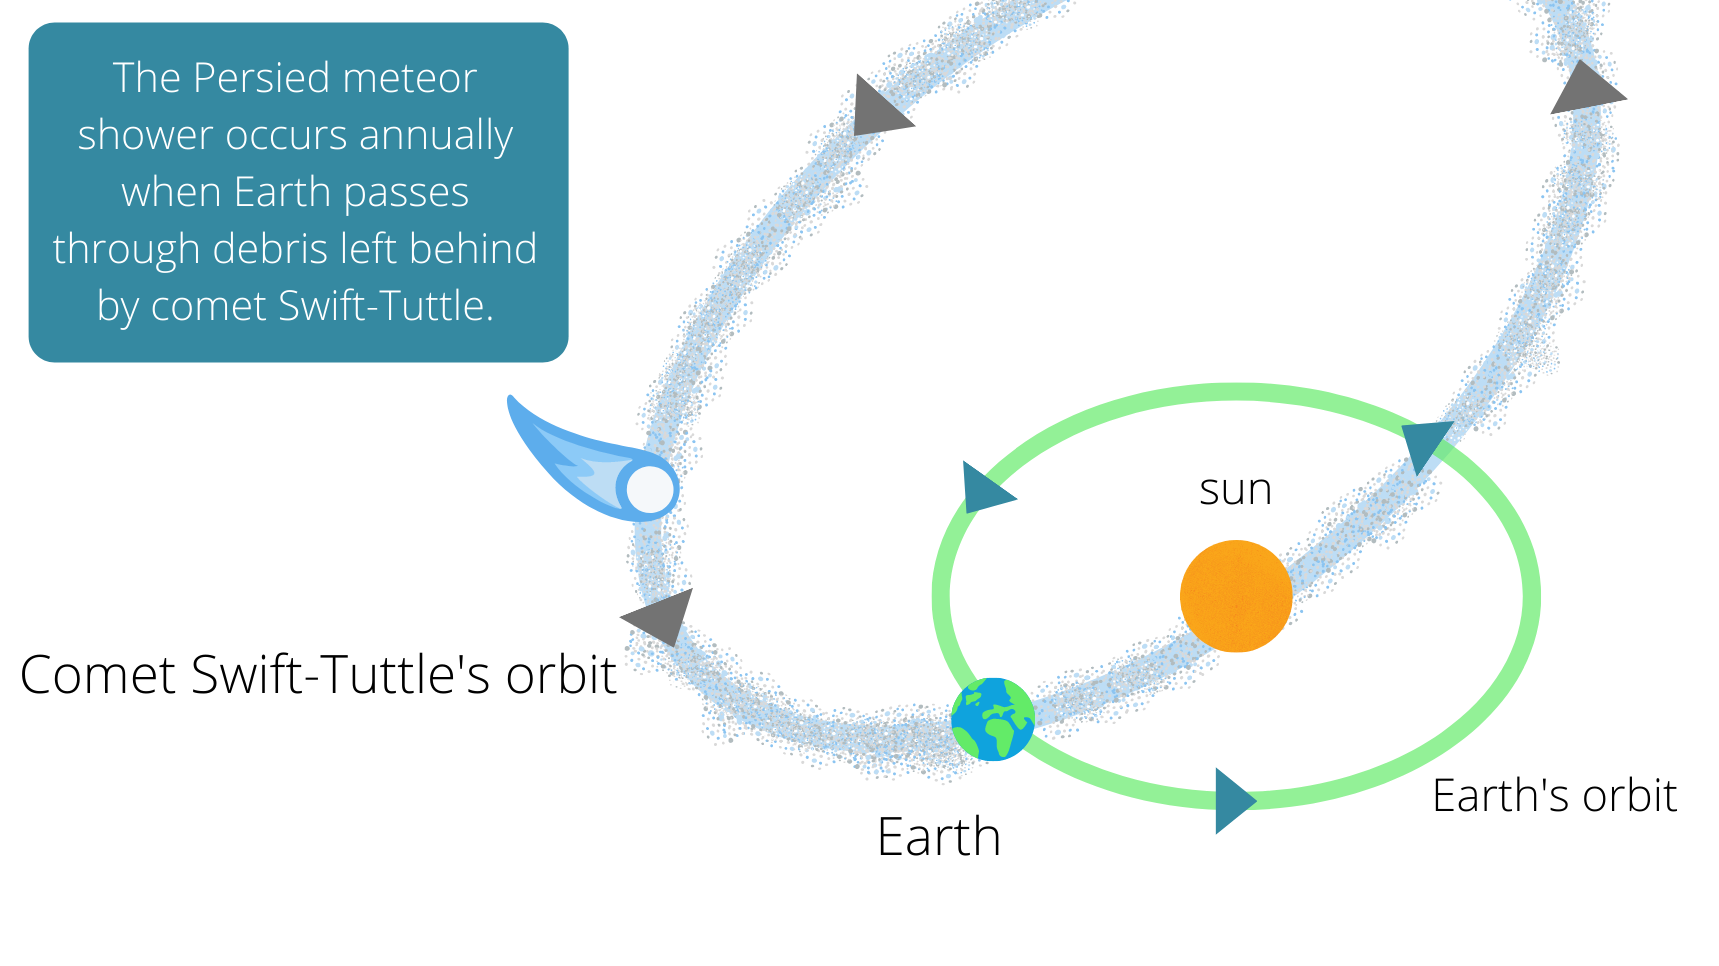 Diagram illustrating the path of Comet Swift-Tuttle's orbit and Earth crossing through this path, when it passes through the dustiest area we experience the Perseid meteor shower.